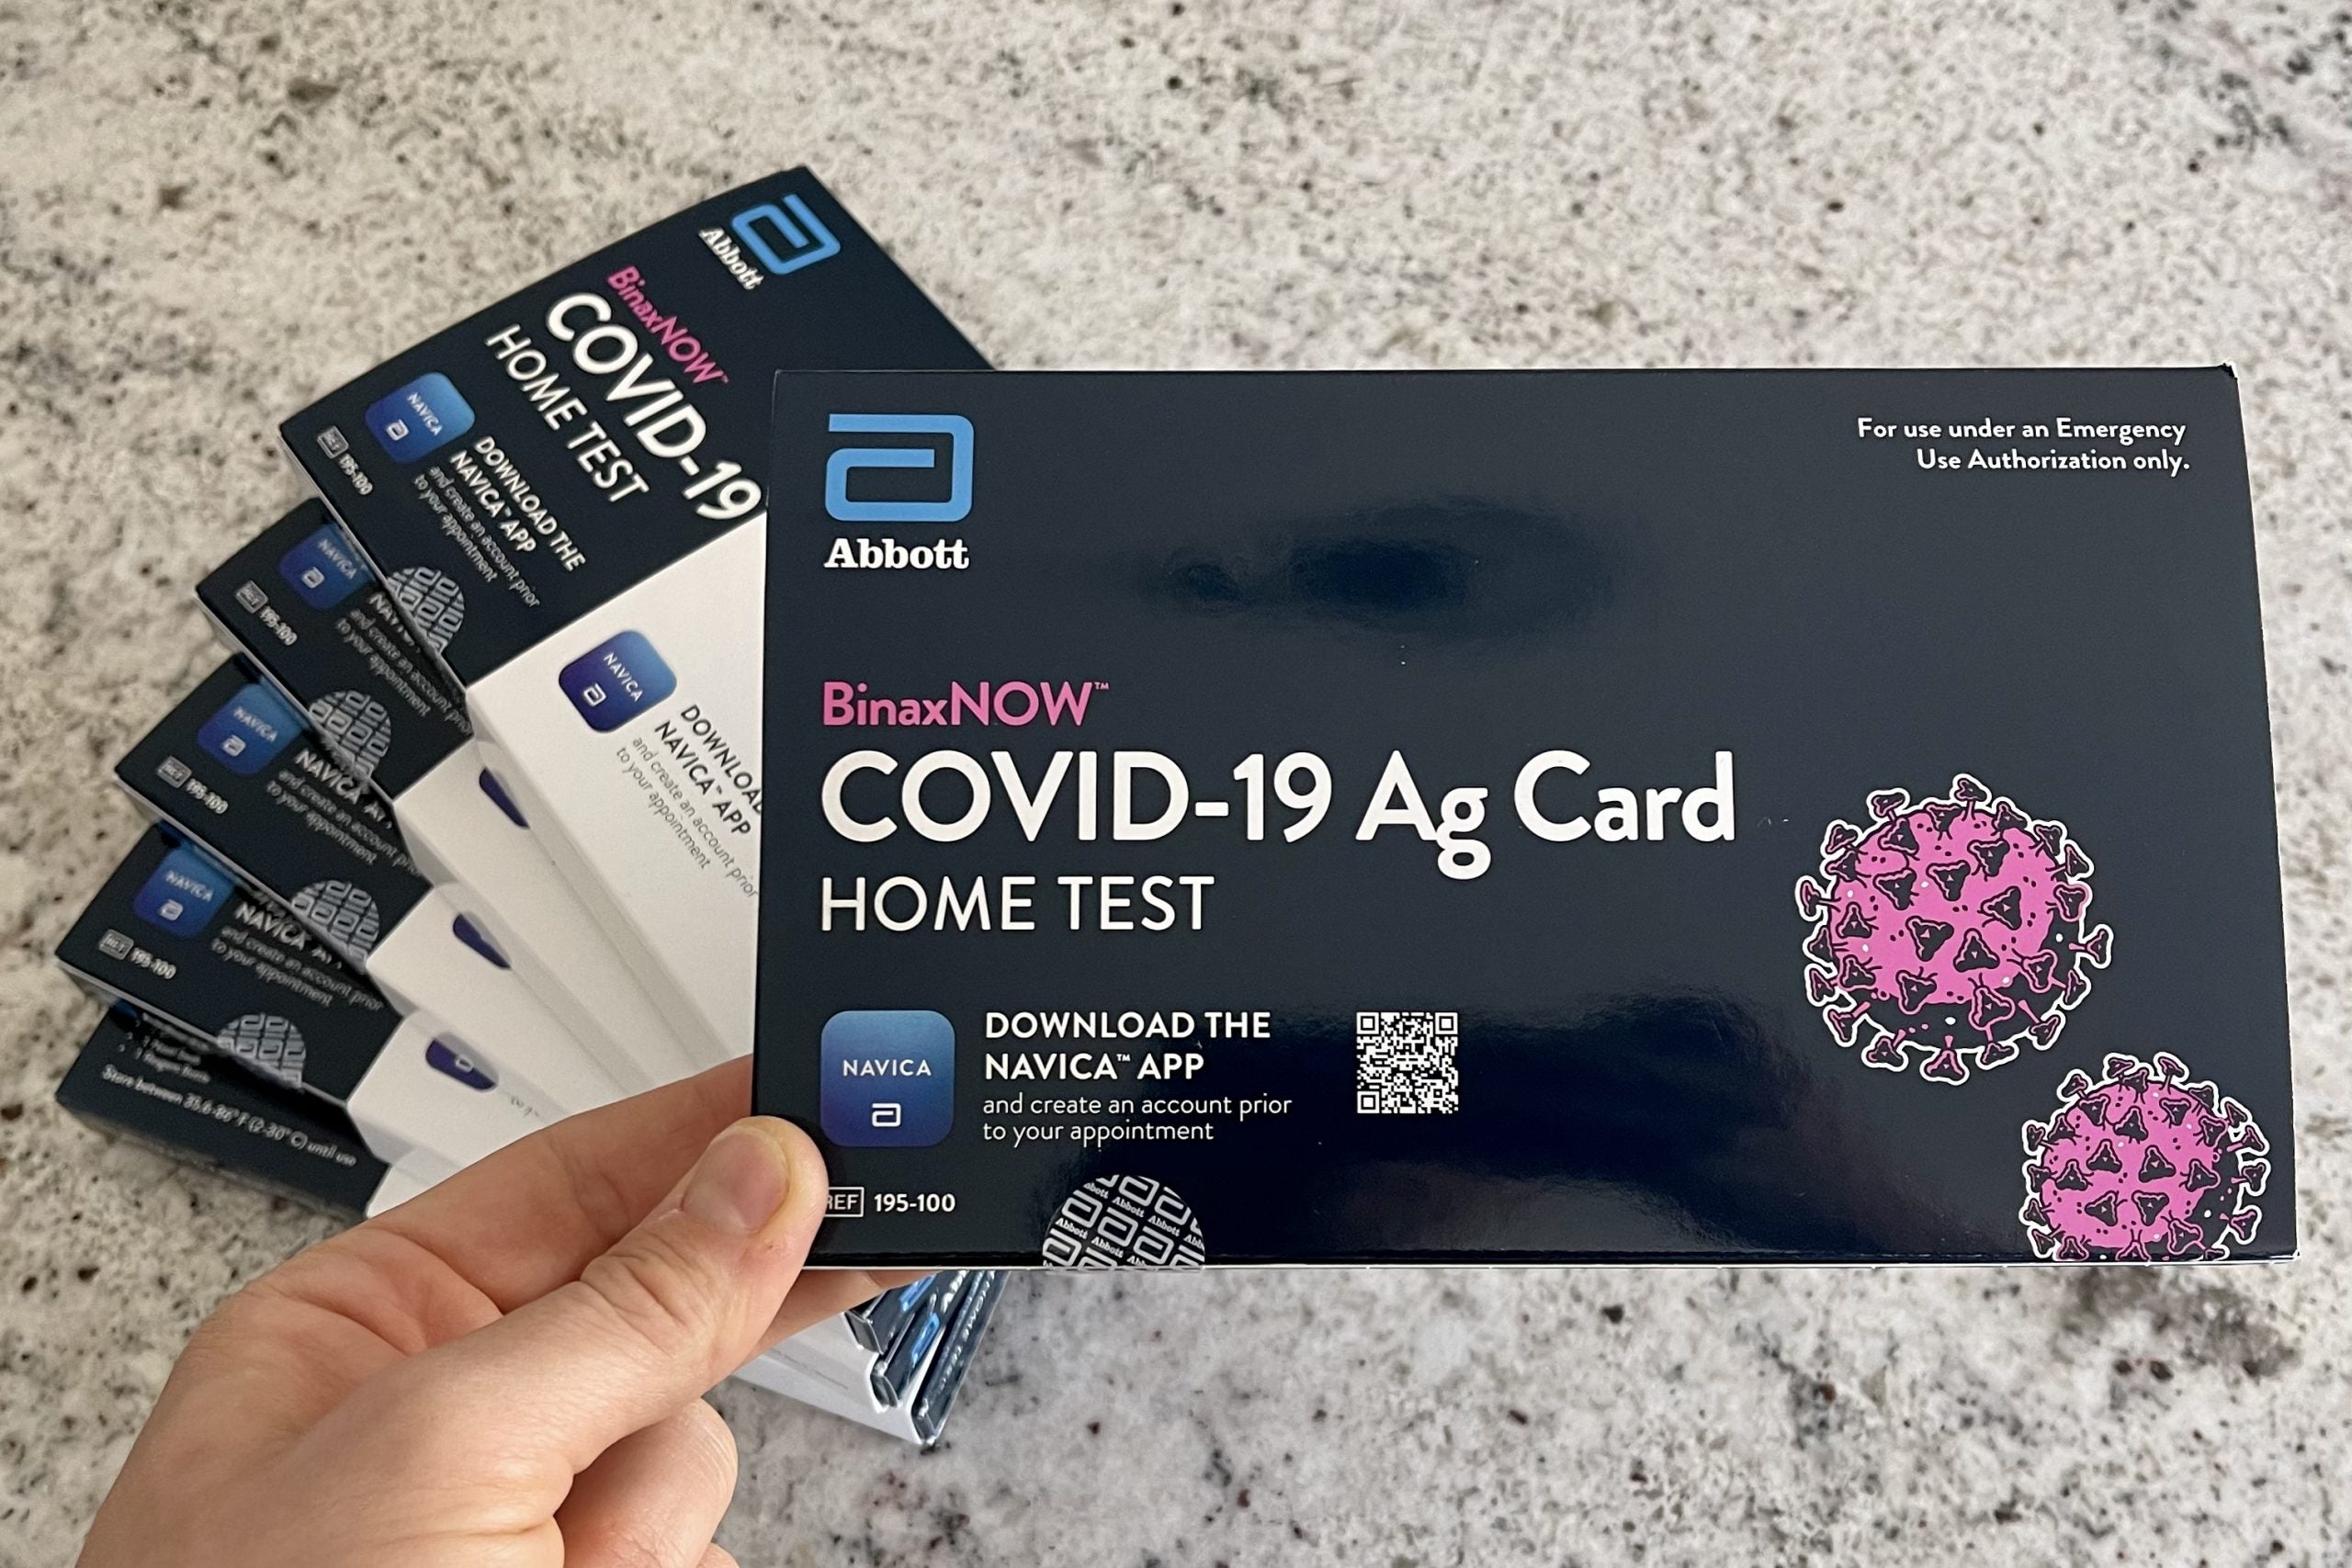 Cruise lines now accept at-home COVID-19 test results